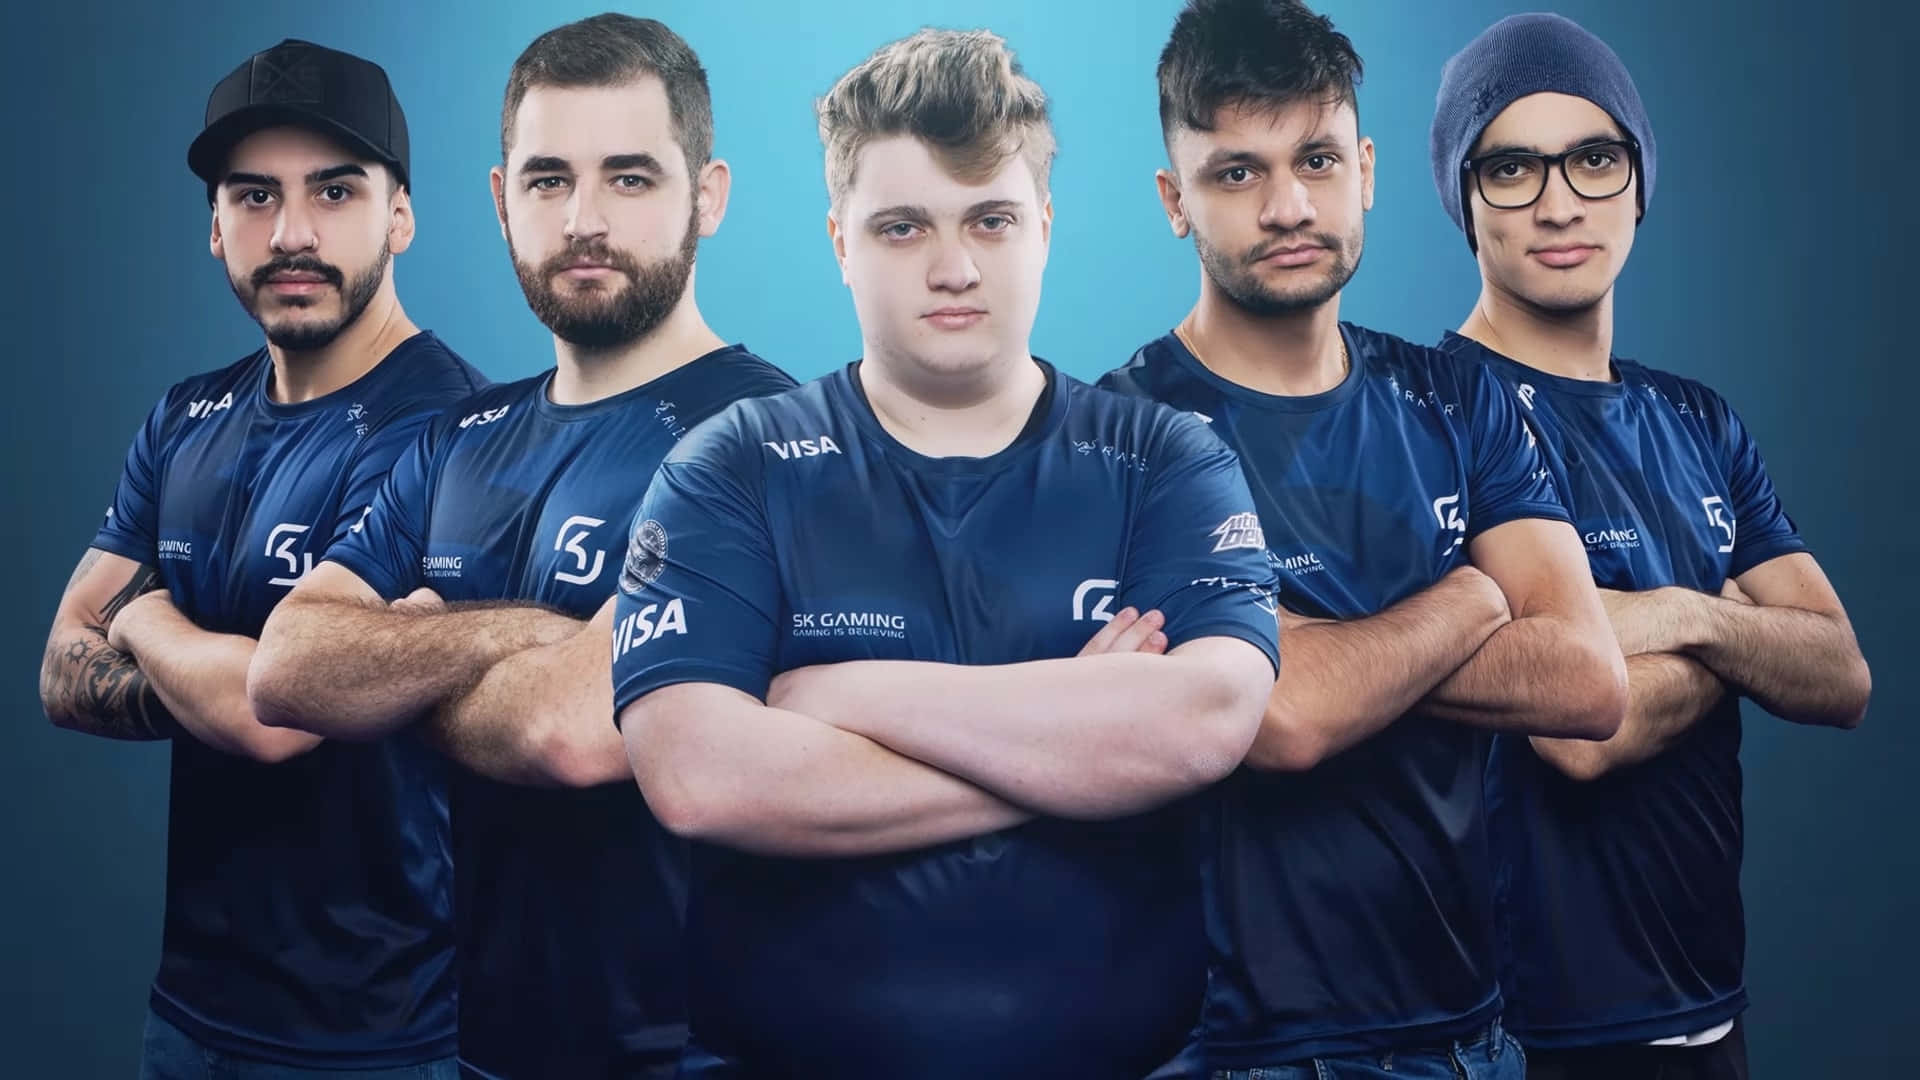 SK Gaming dominating an esports competition with their exceptional gaming skills Wallpaper